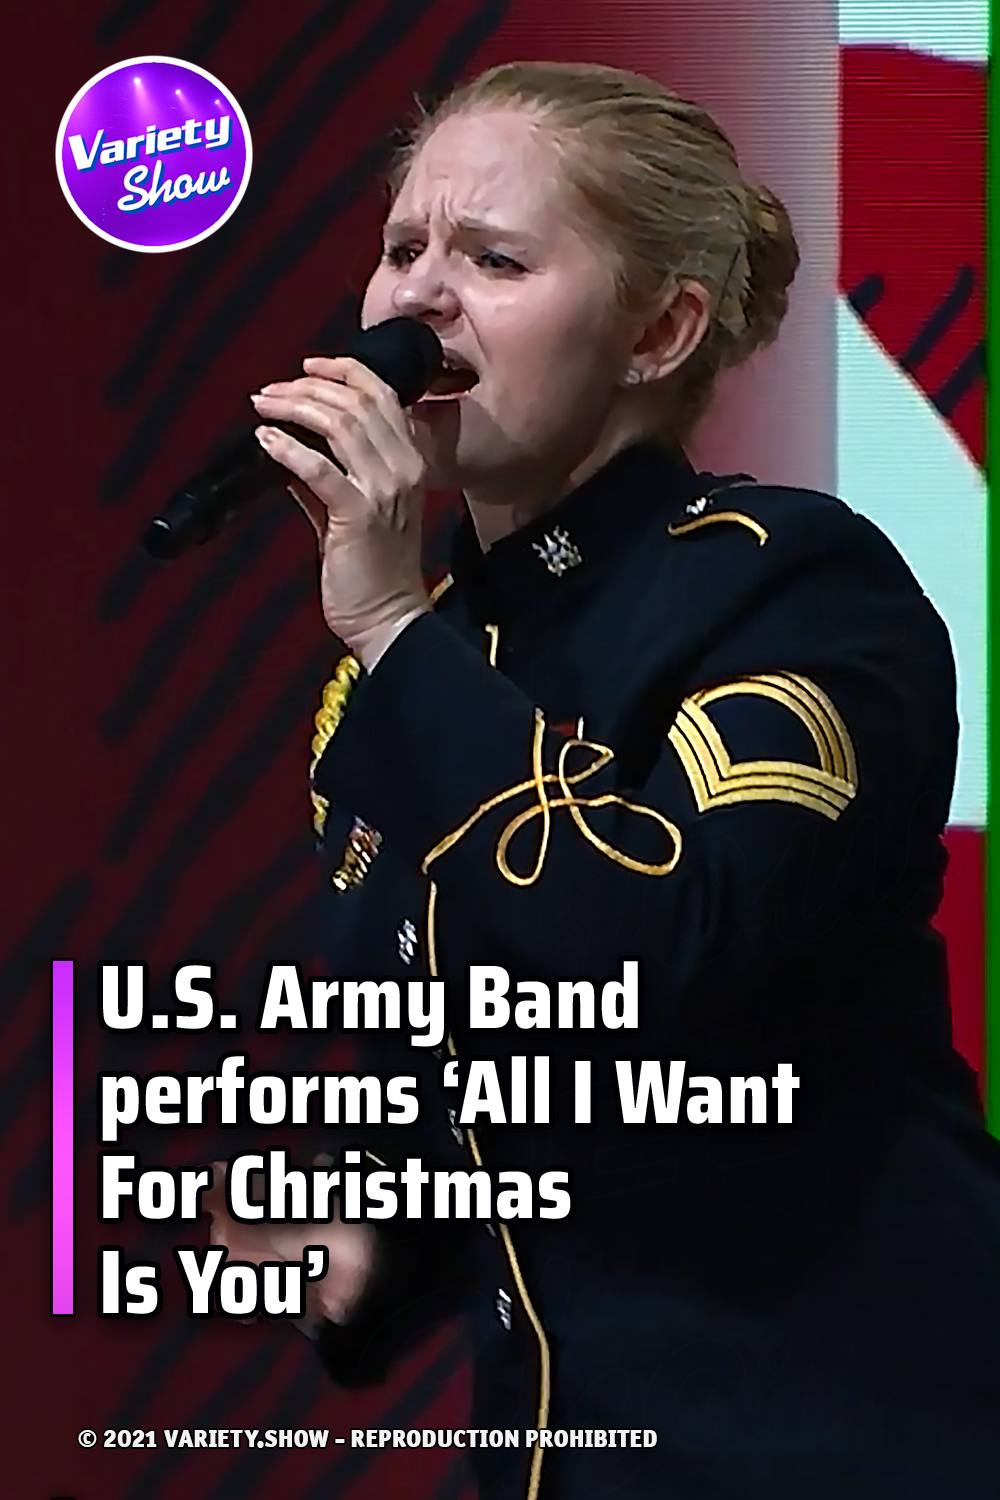 U.S. Army Band performs ‘All I Want For Christmas Is You’